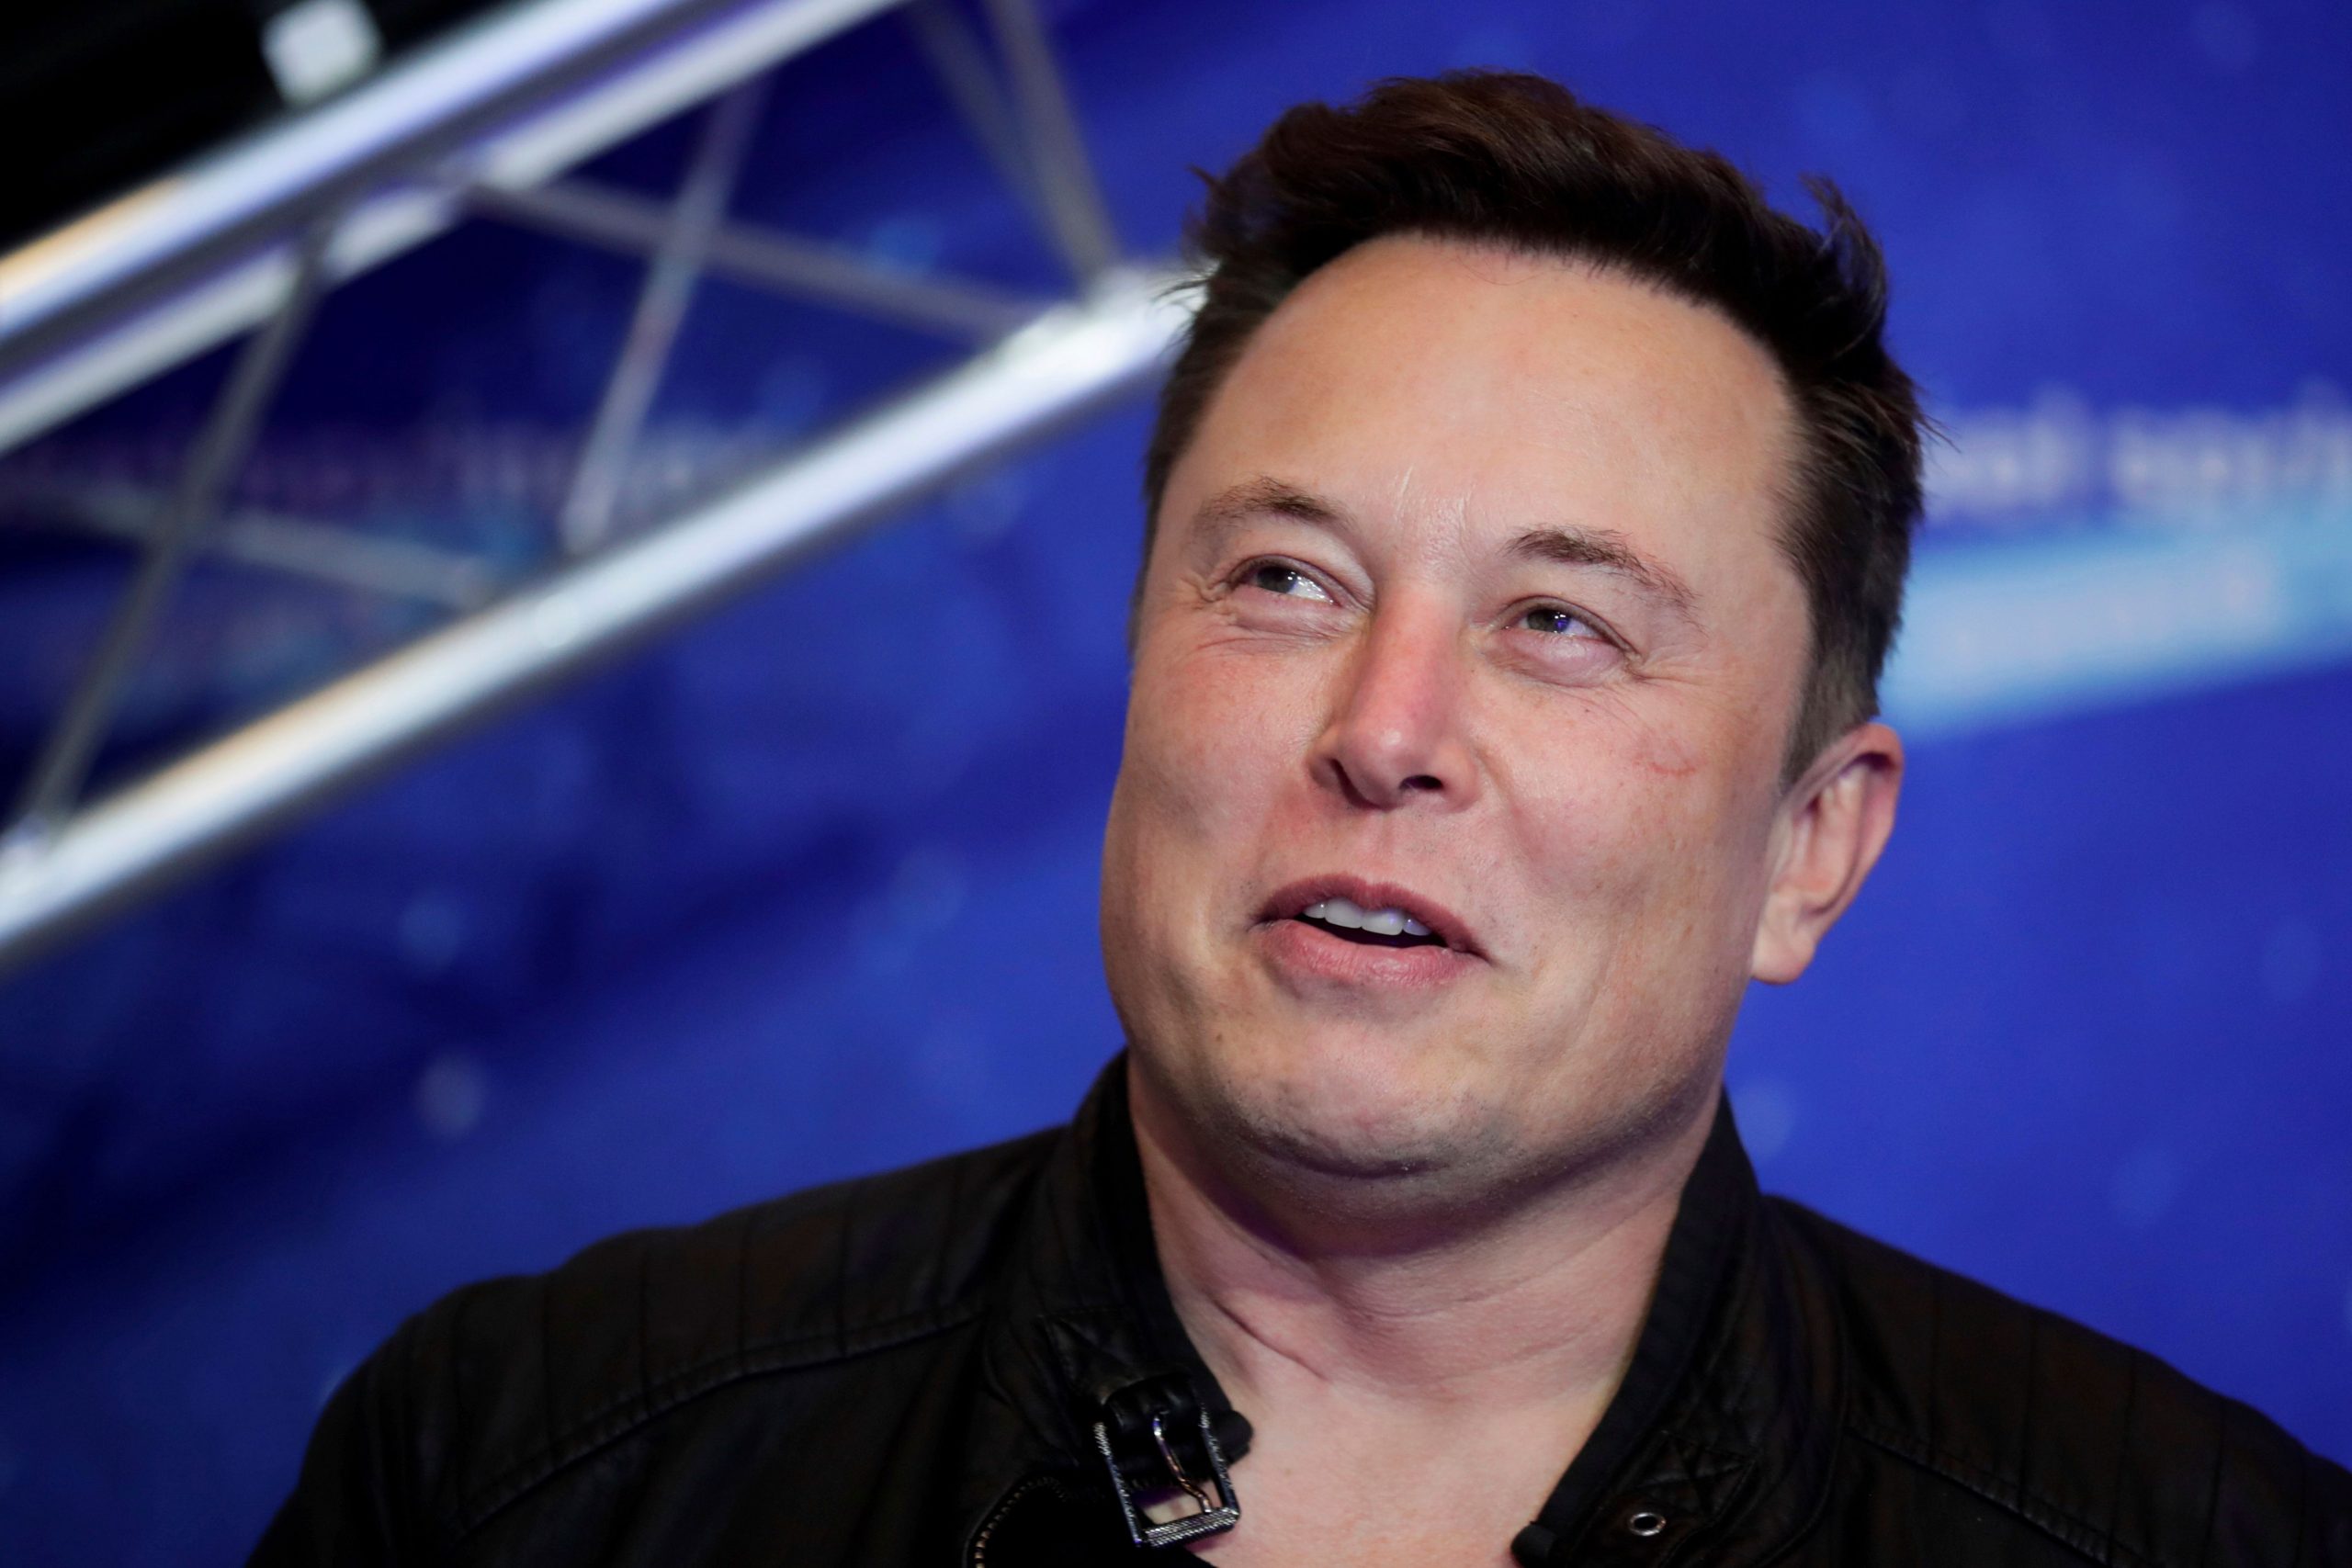 Explained: Has Elon Musk become estranged with Donald Trump?